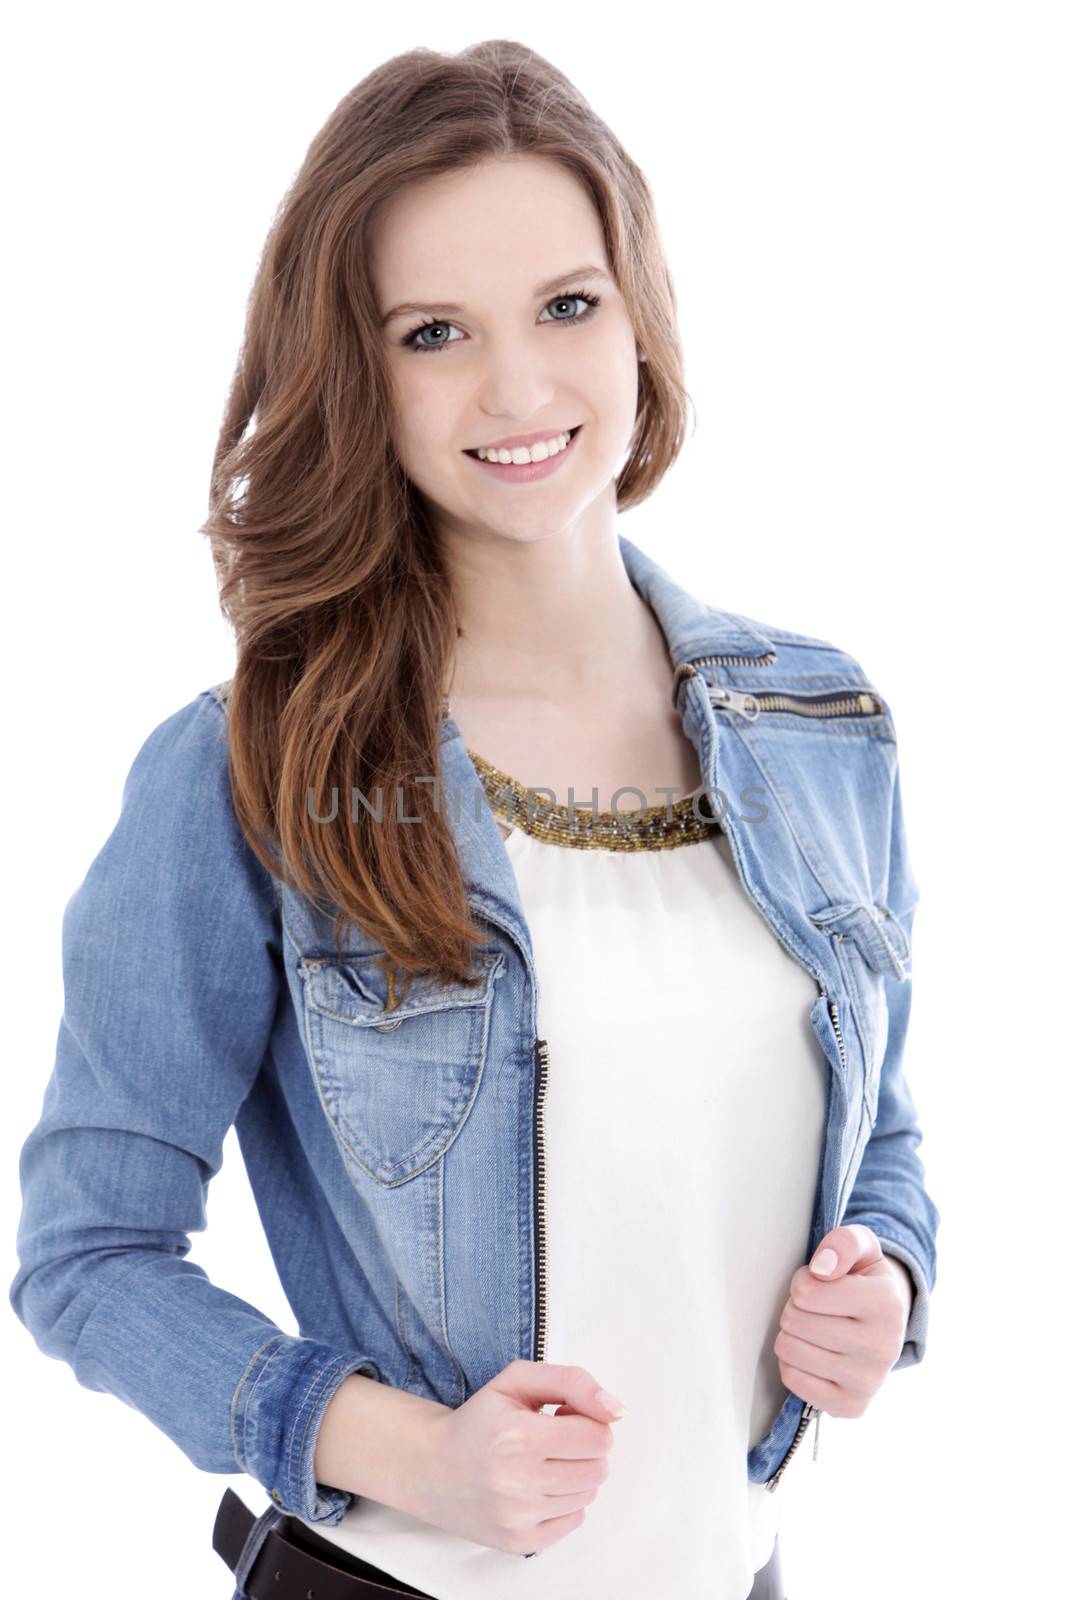 Smiling teenage woman in a denim jacket by Farina6000